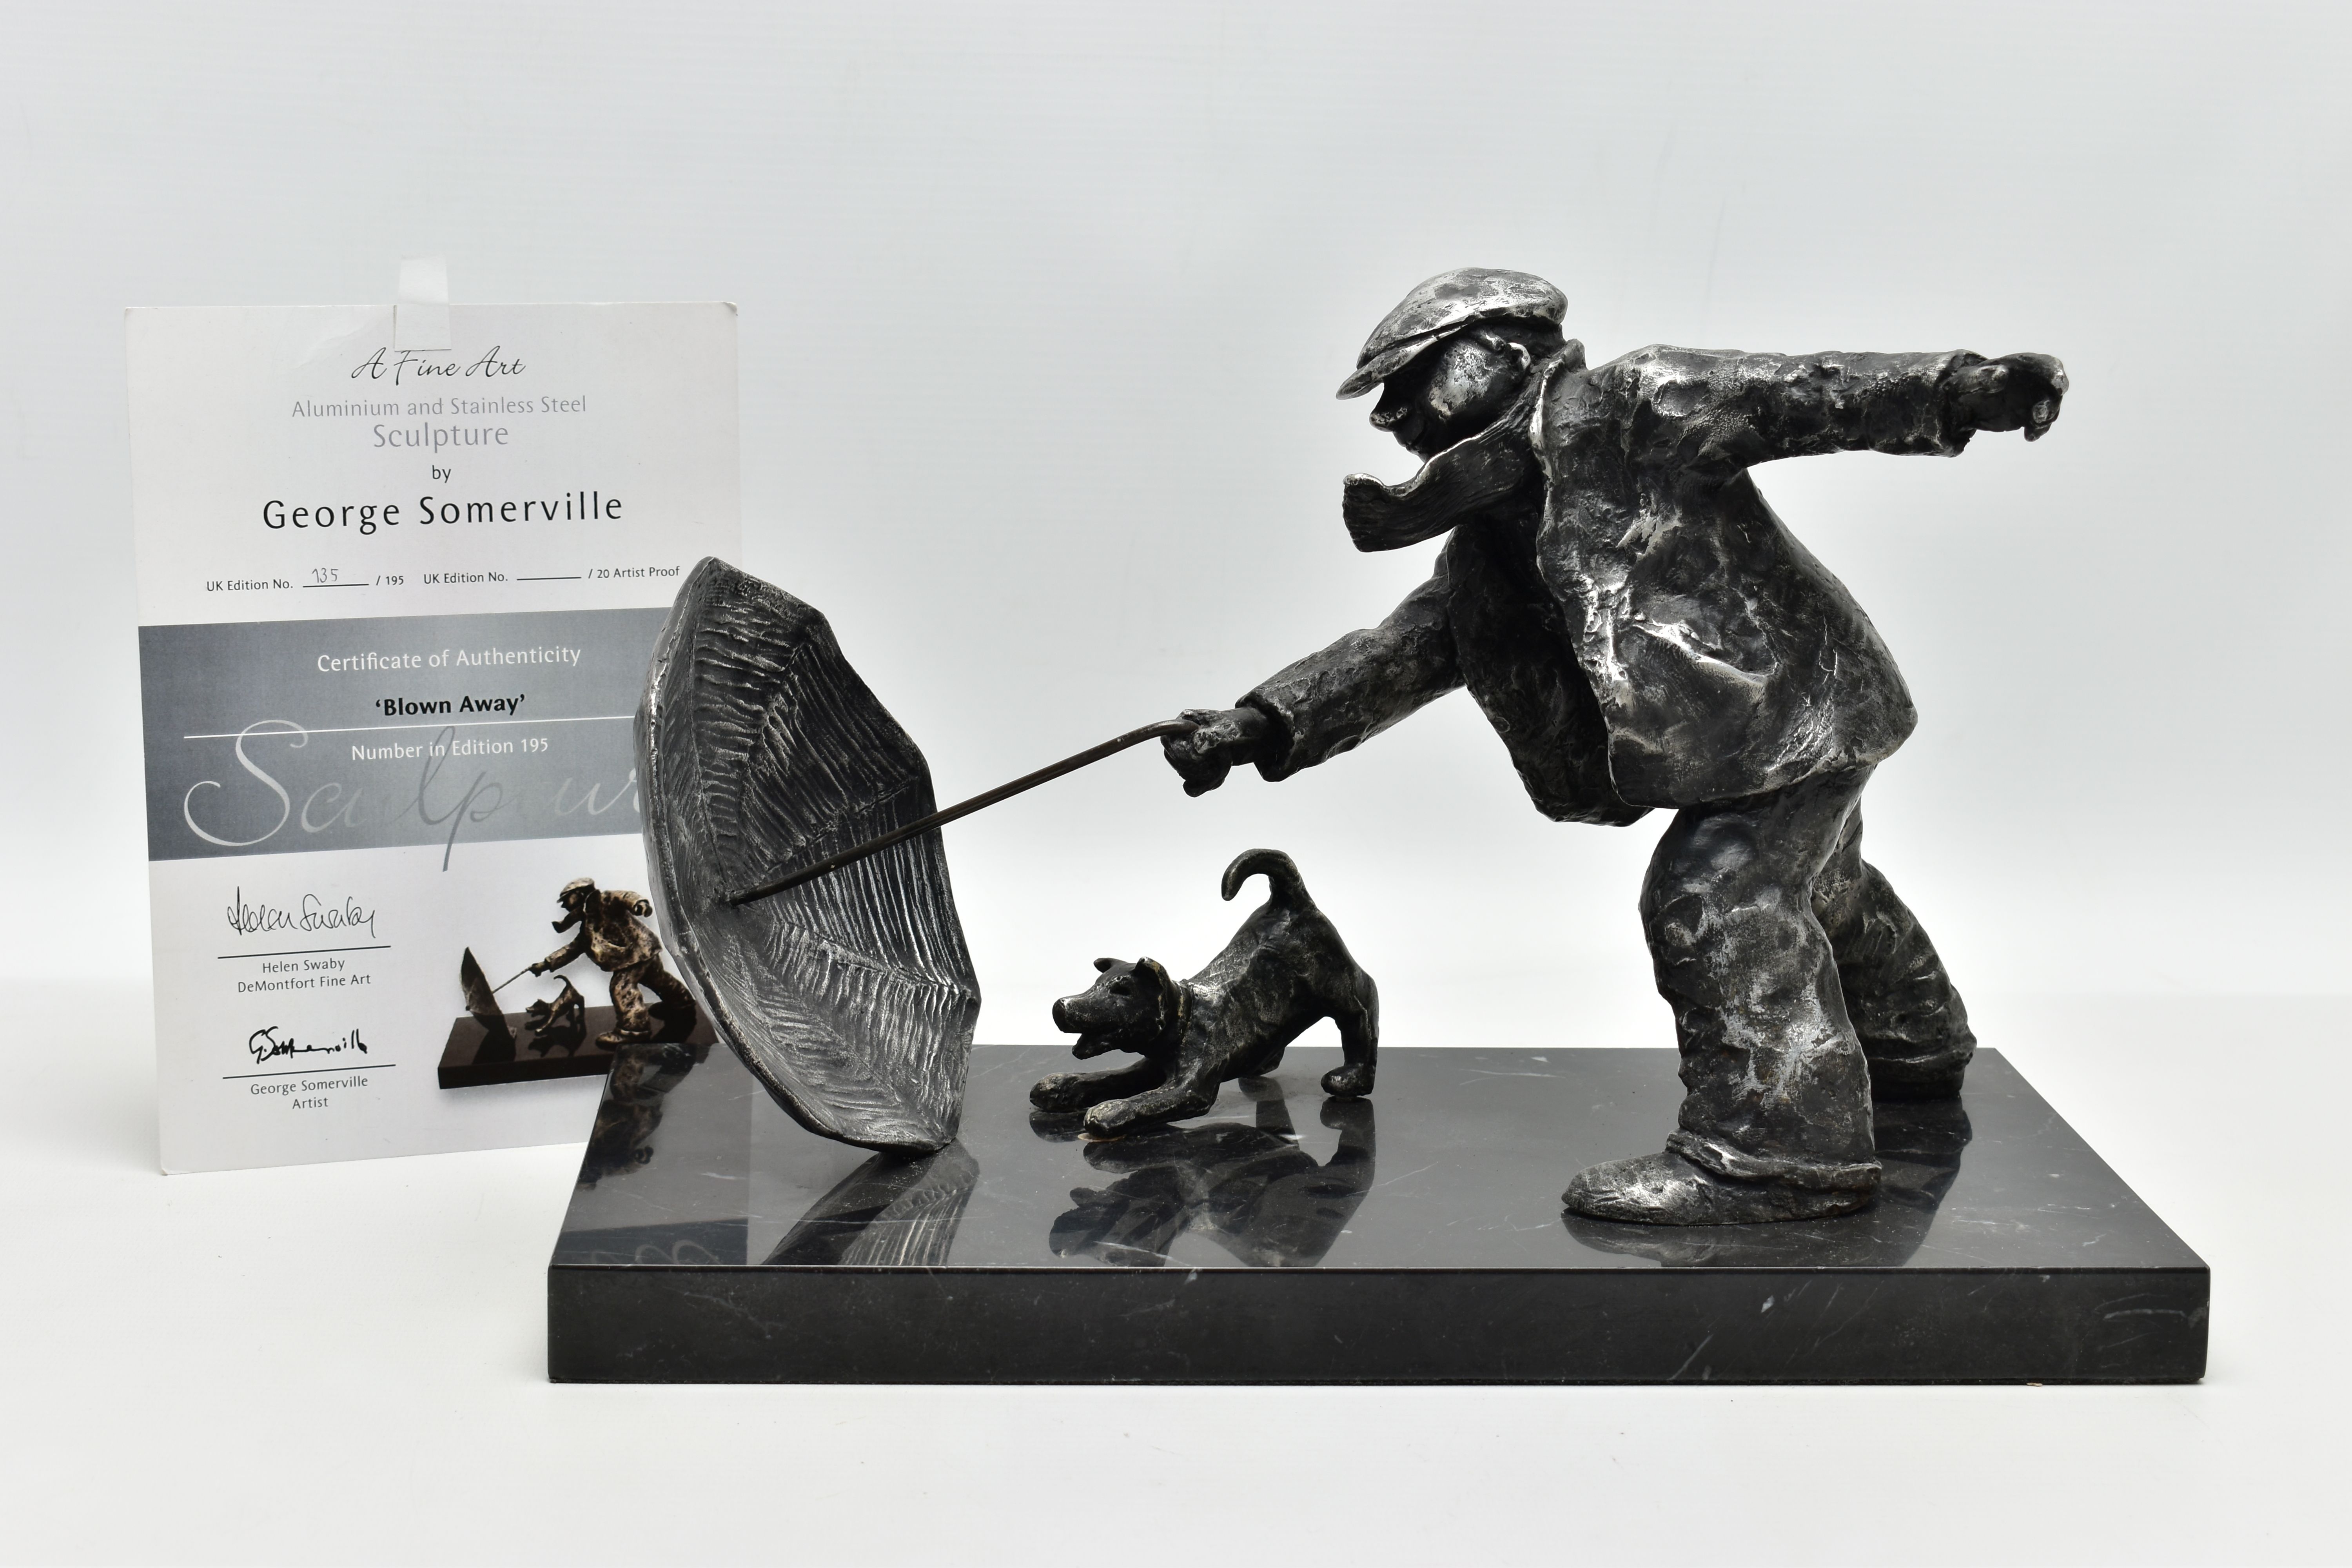 GEORGE SOMERVILLE (SCOTTISH 1947) 'BLOWN AWAY', a limited edition aluminium sculpture depicting a